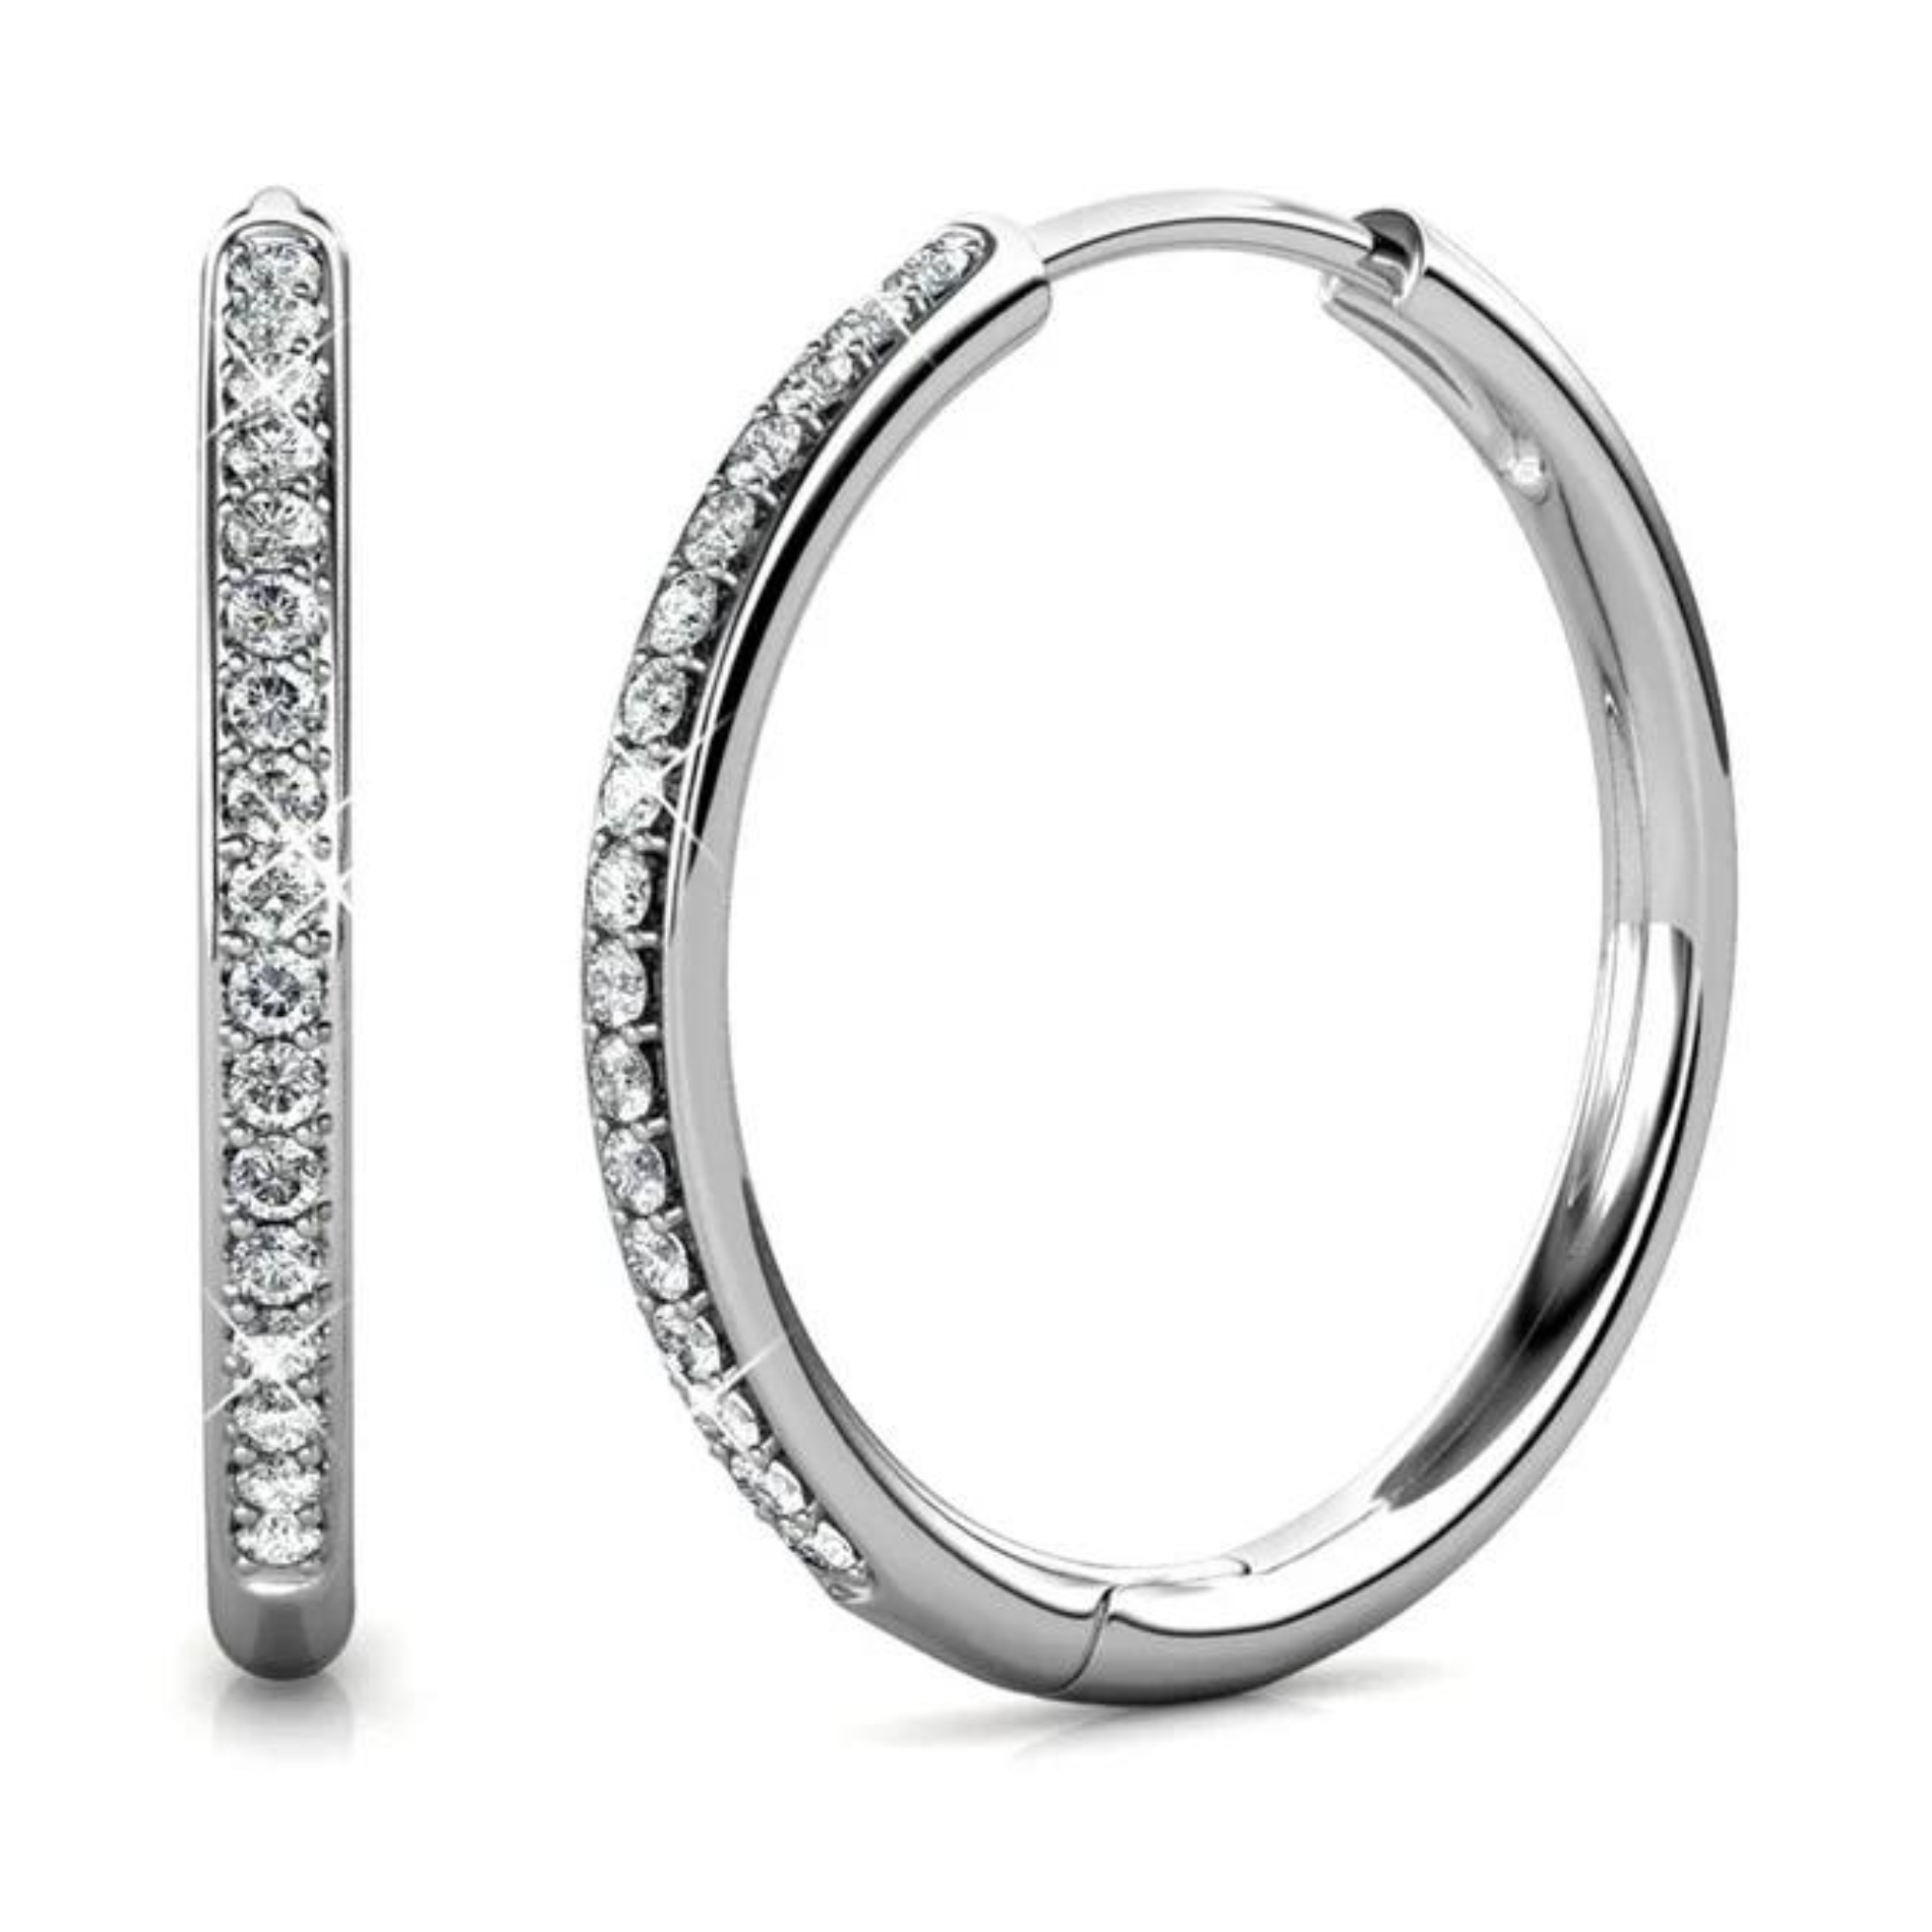 Cate & Chloe Bianca 18k White Gold Plated Silver Hoop Earrings with Swarovski Crystals